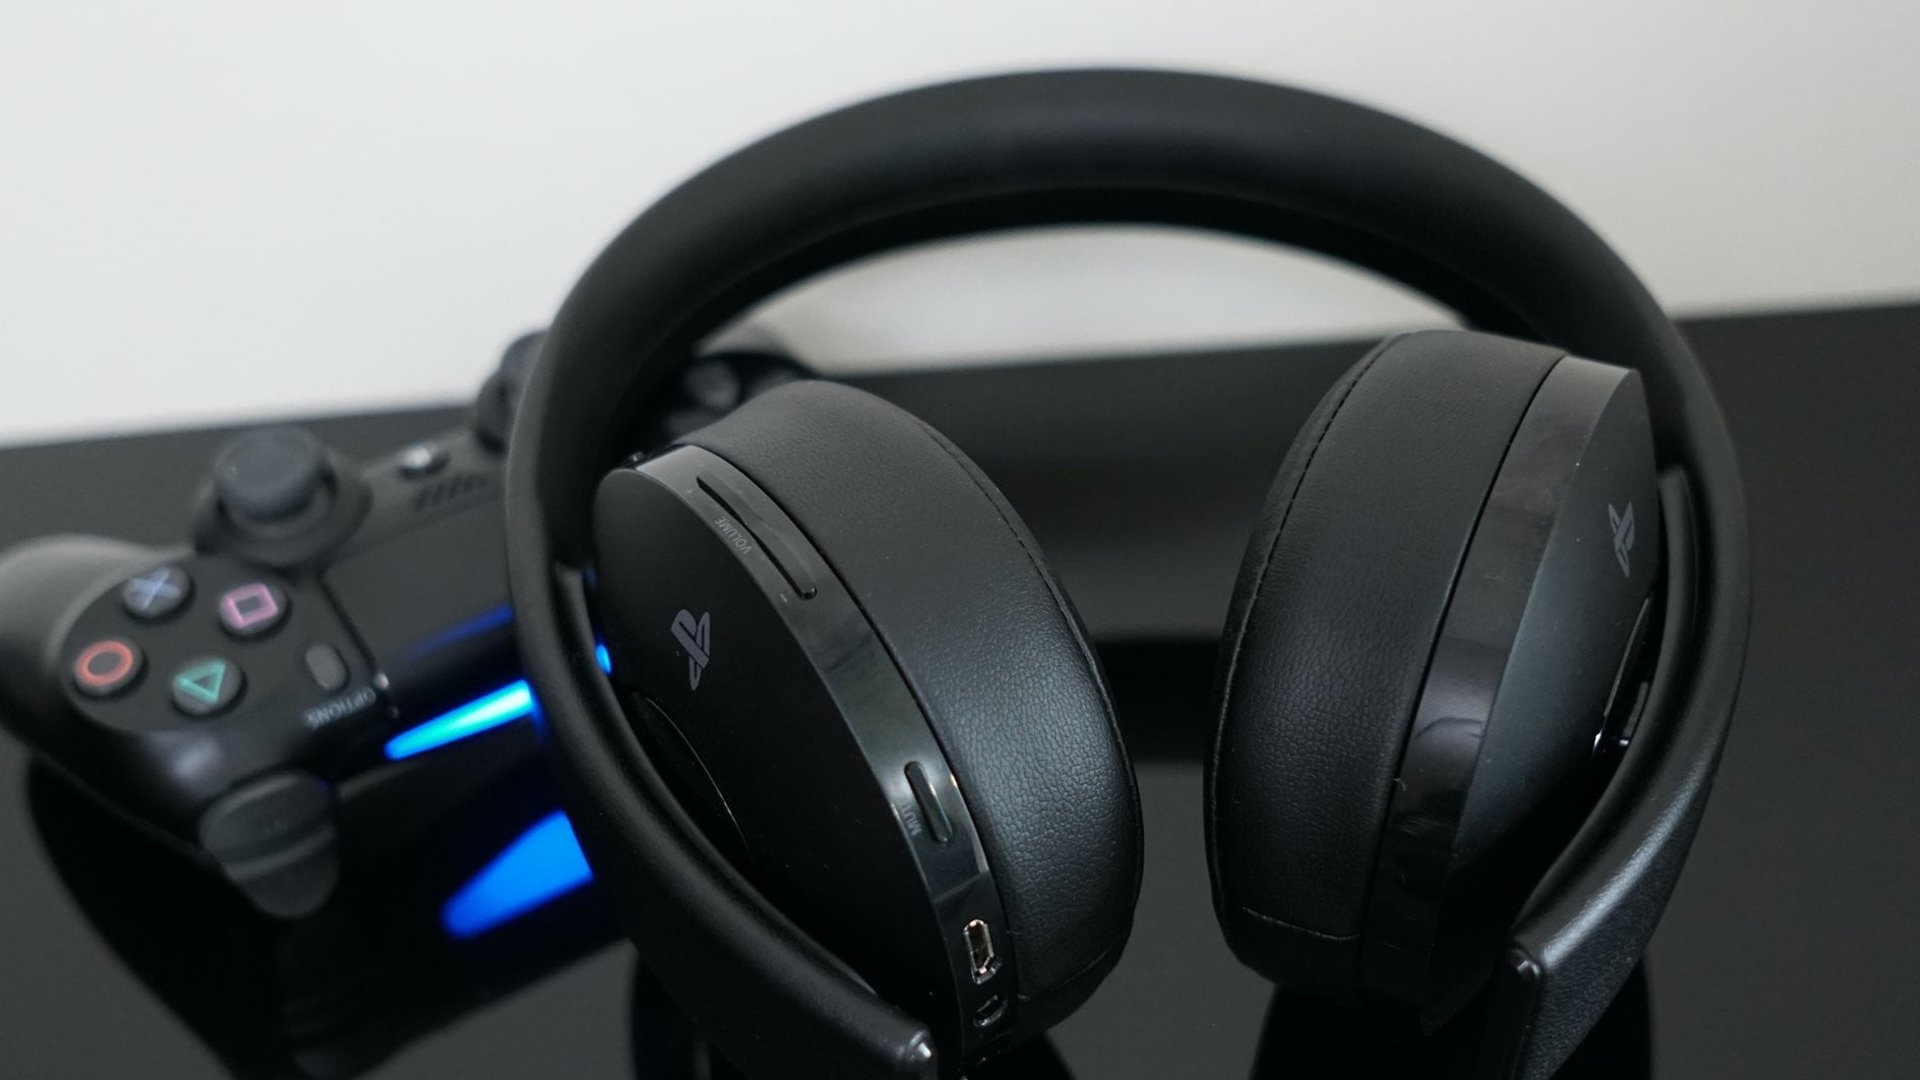 Corsair Headset On PS4: A Connection Guide